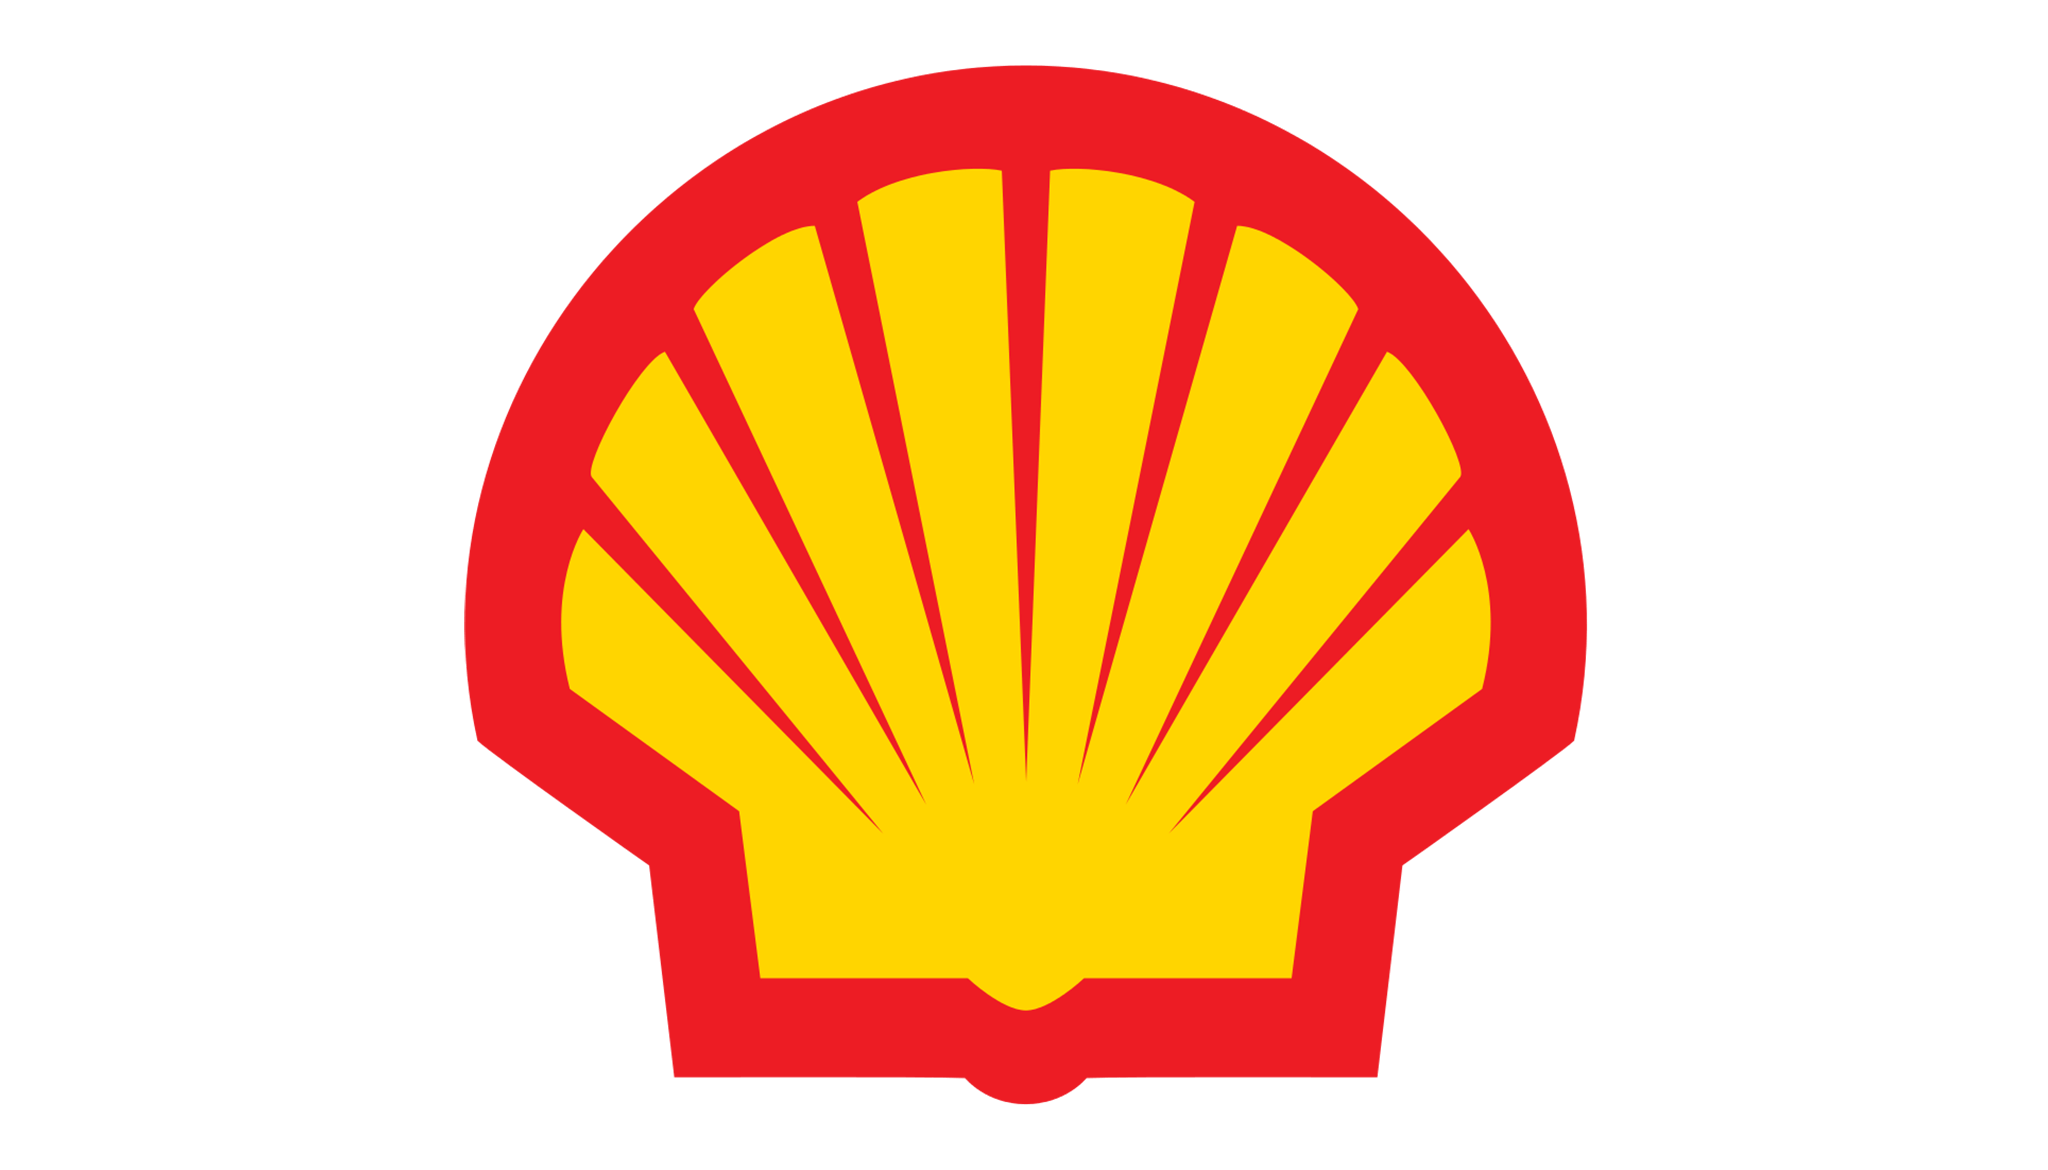 SHELL OIL AND GAS